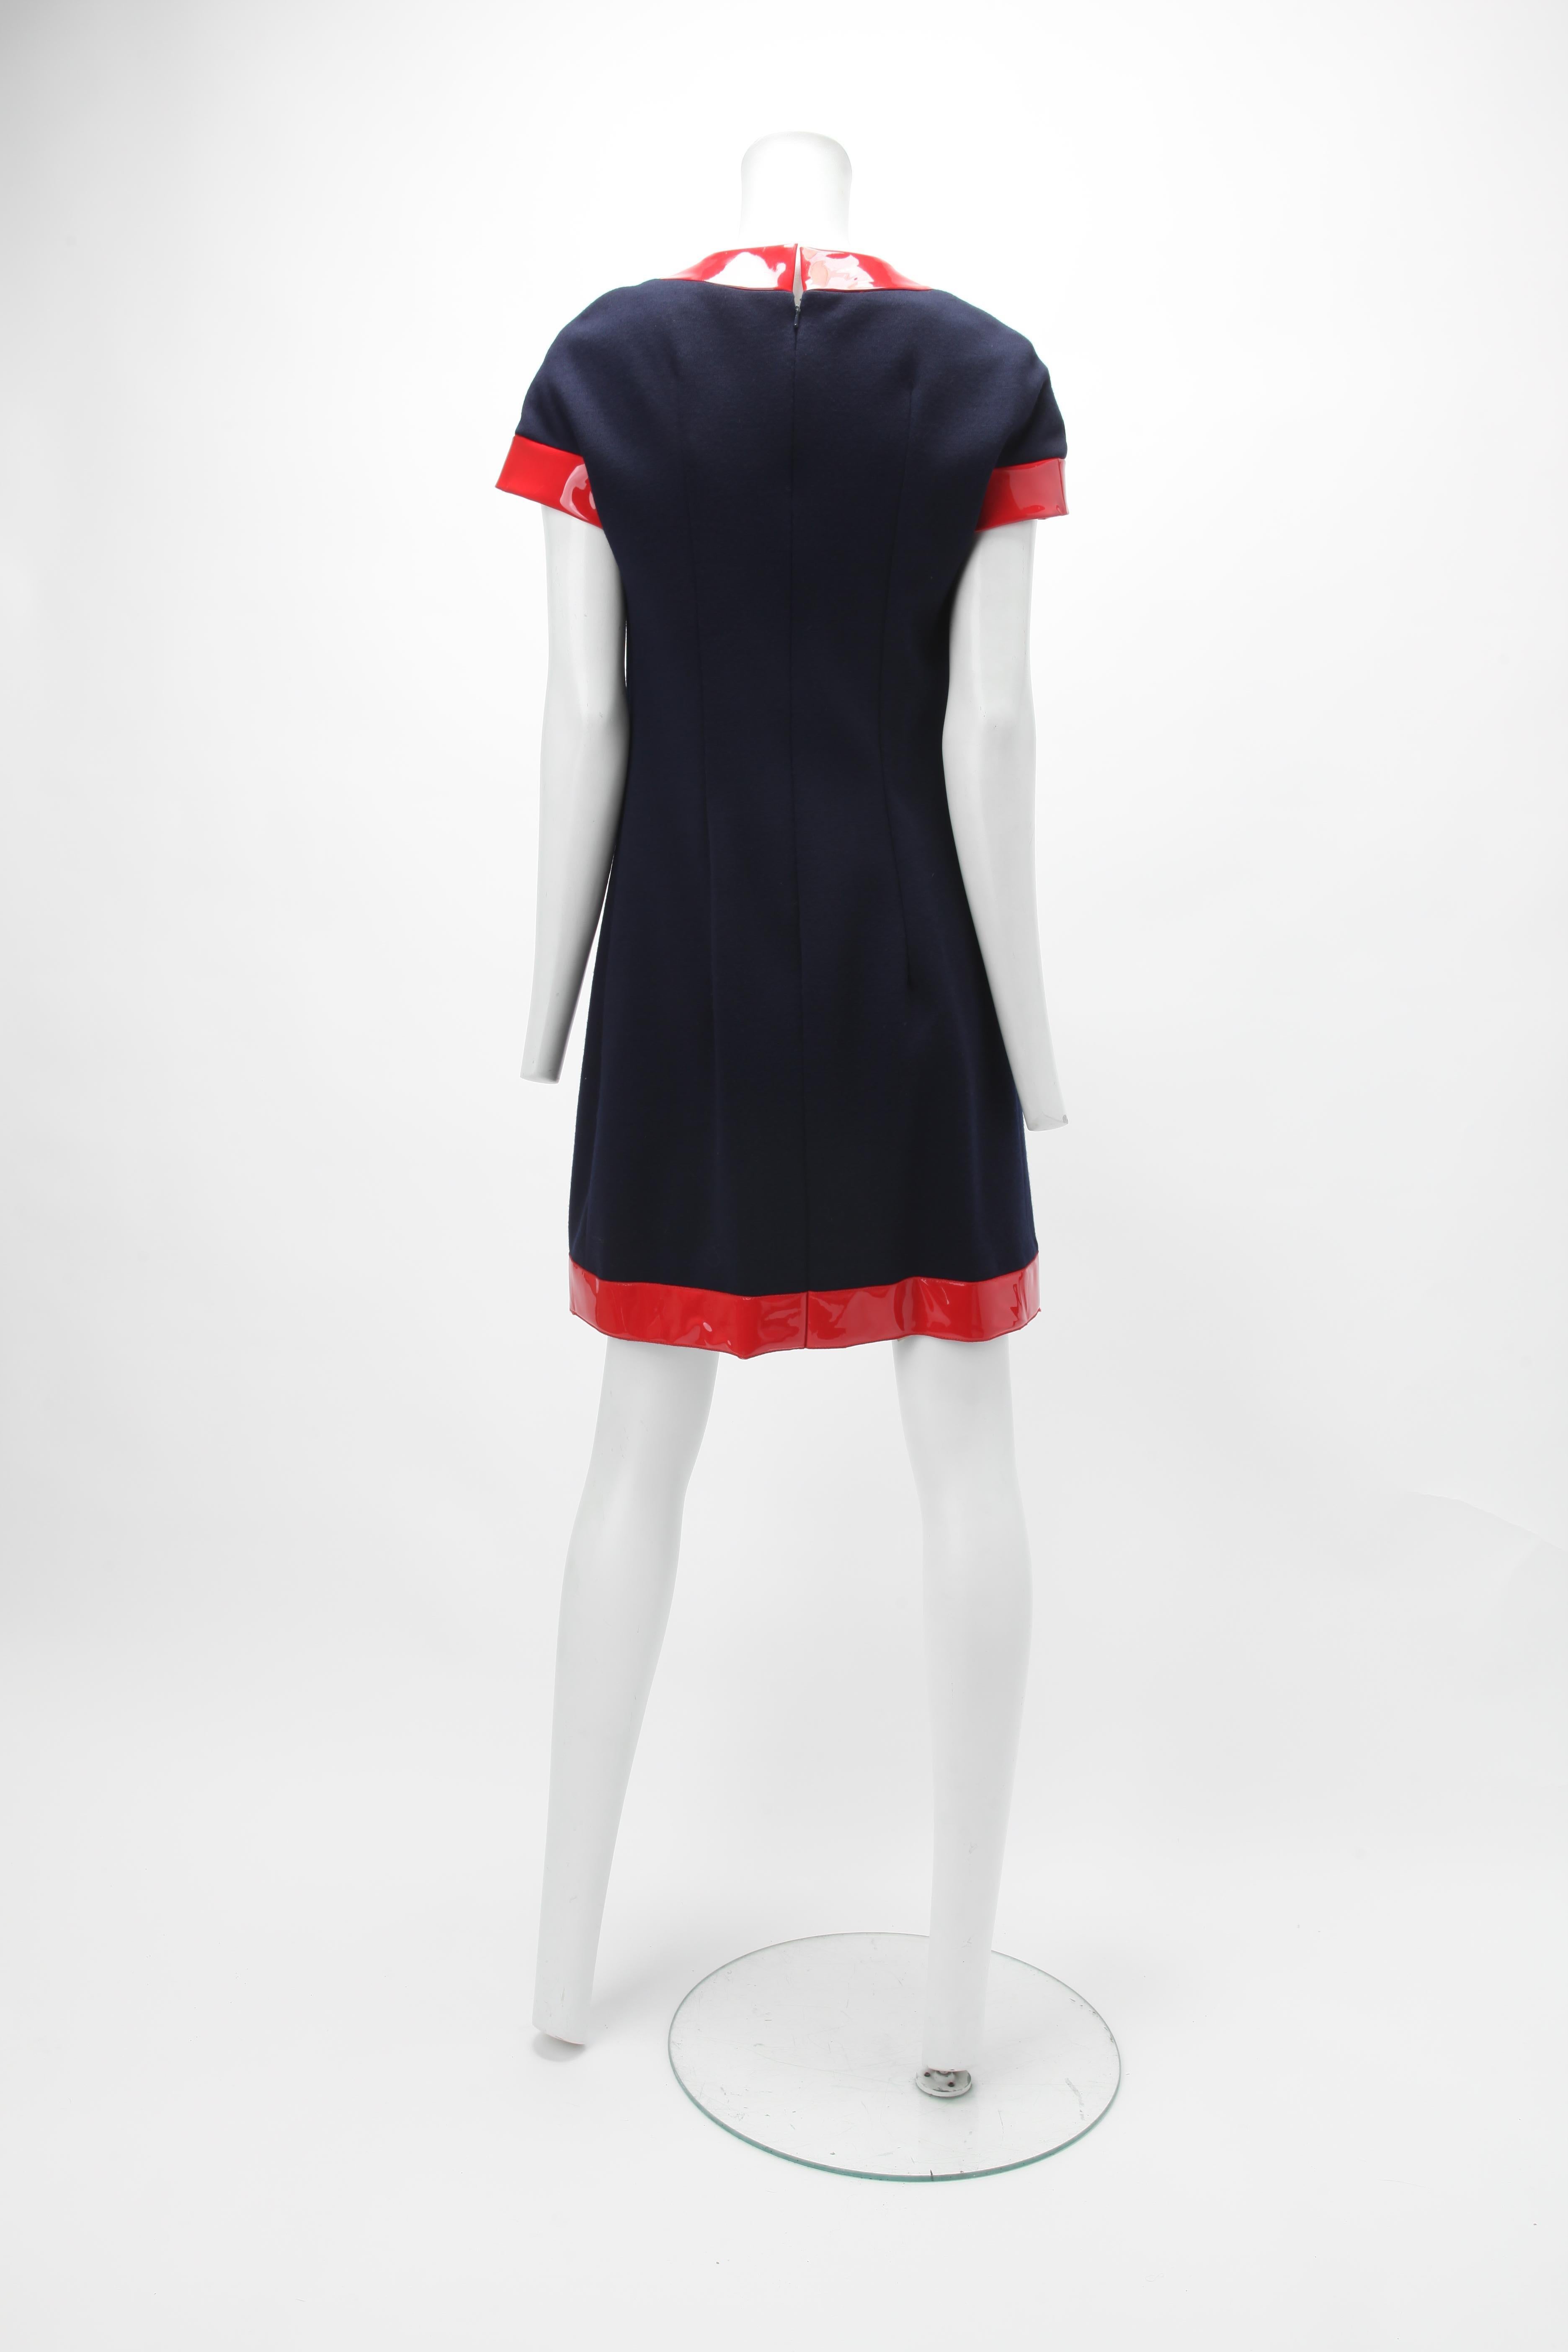 c. 1967 Pierre Cardin Documented Dress Museum In Good Condition For Sale In New York, NY